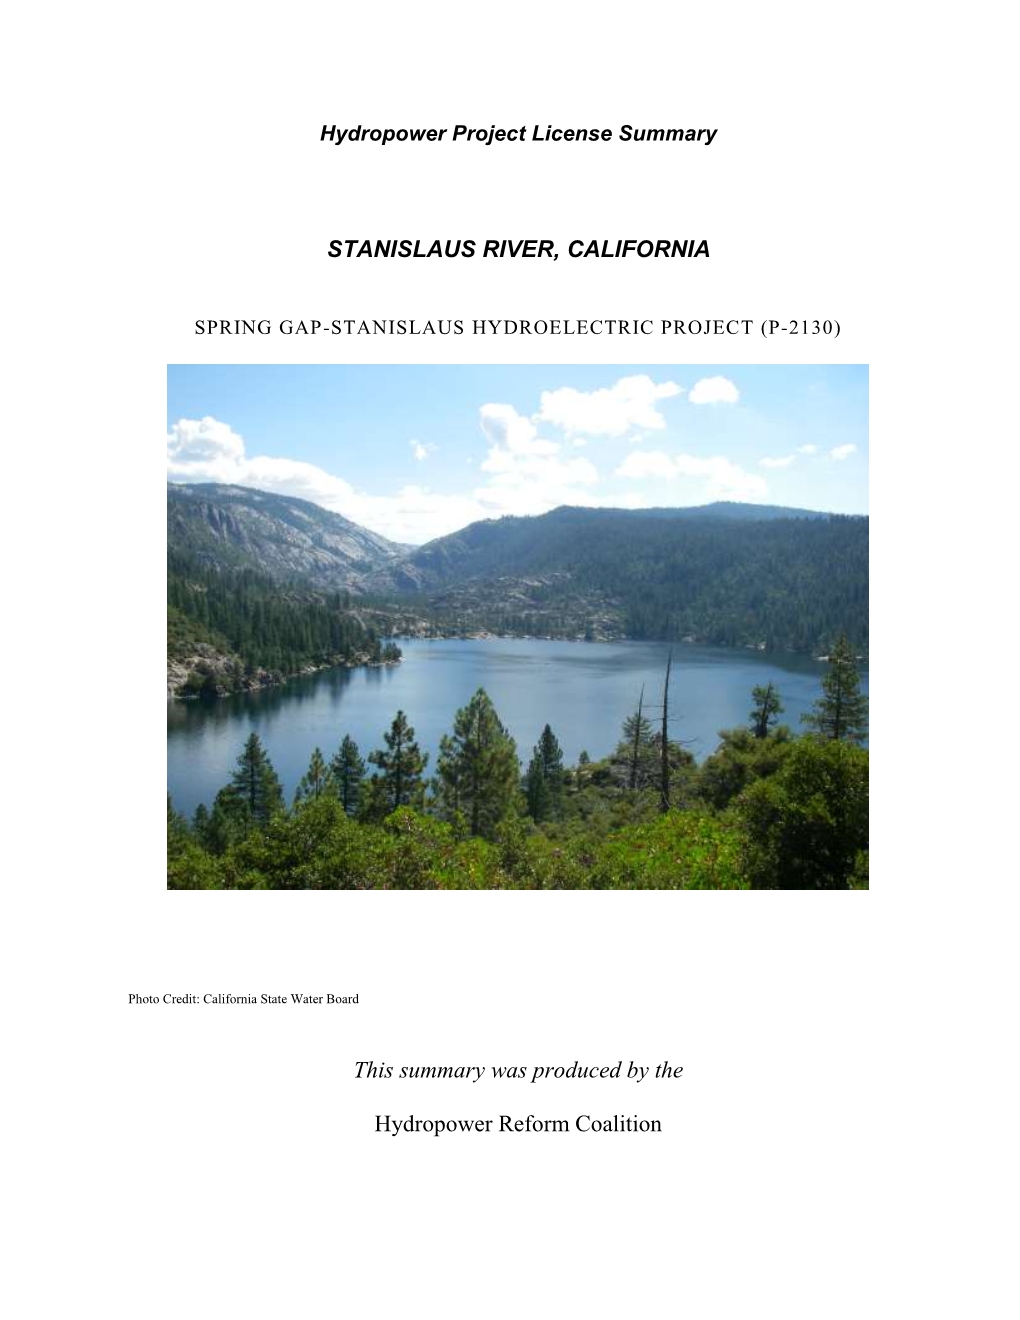 Spring Gap-Stanislaus Project Is Located in Calaveras and Tuolumne Counties, CA on the Middle Fork Stanislaus River (Middle Fork) and South Fork Stanislaus River